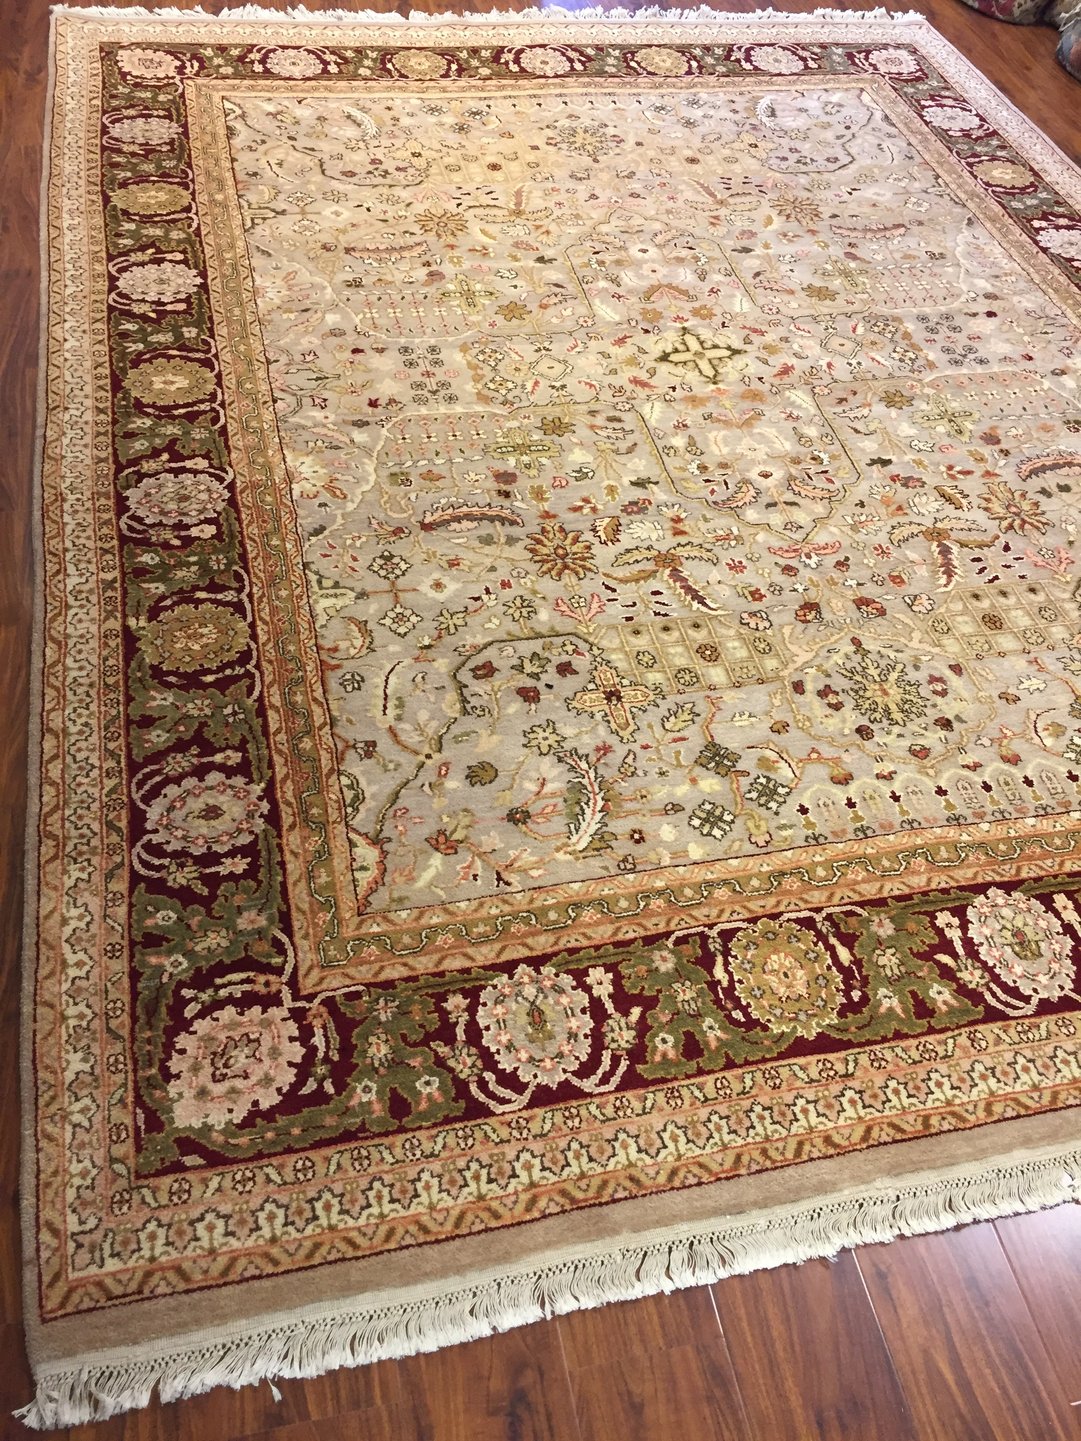 Authentic Handmade fine Indiaian Rug-Wool Floral Pattern-Light Olive/Burgundy-(8 by 10.2 Feet)